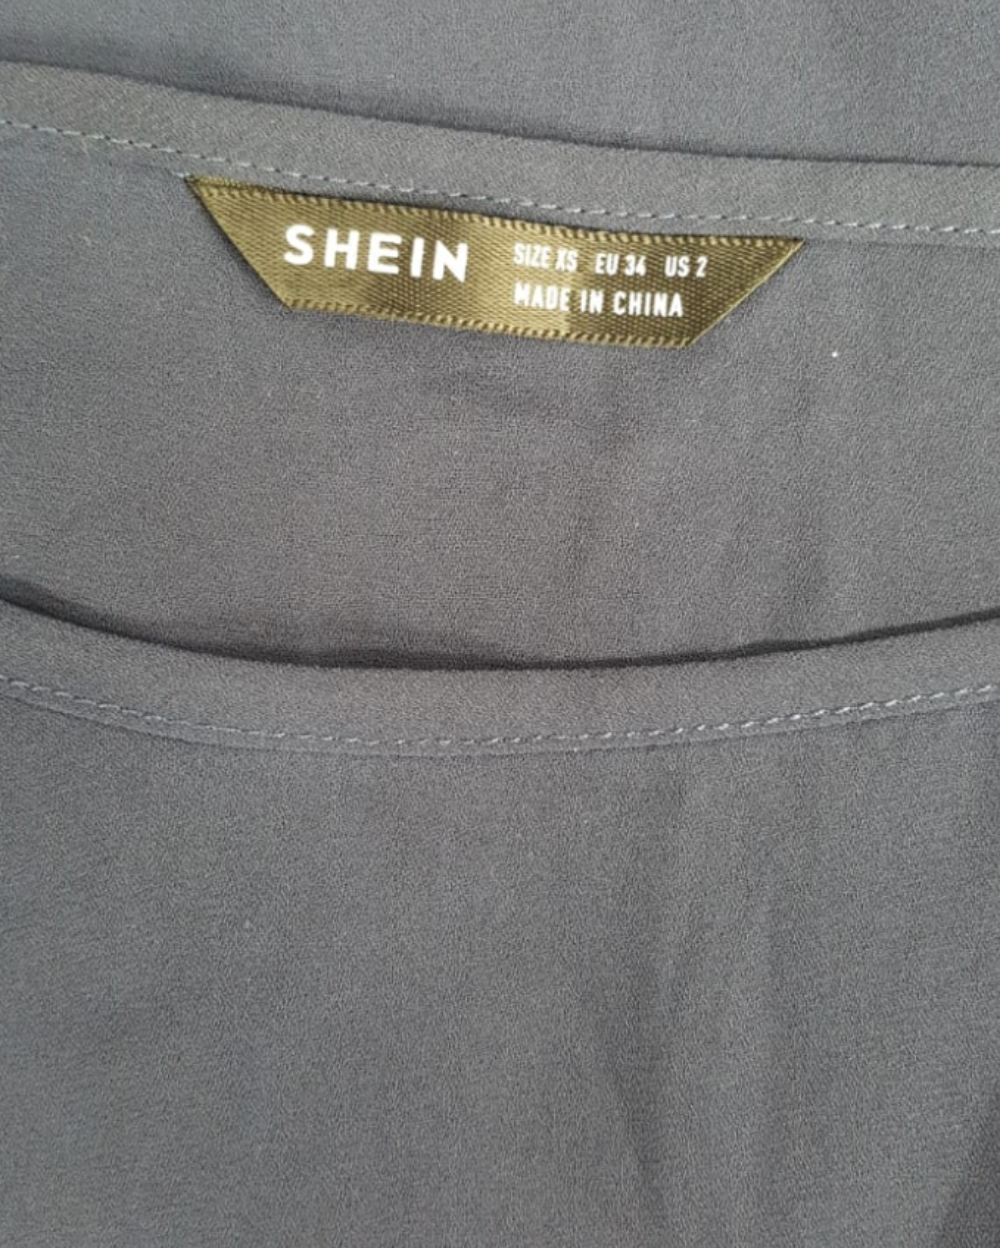 Blusas Casuales Shein